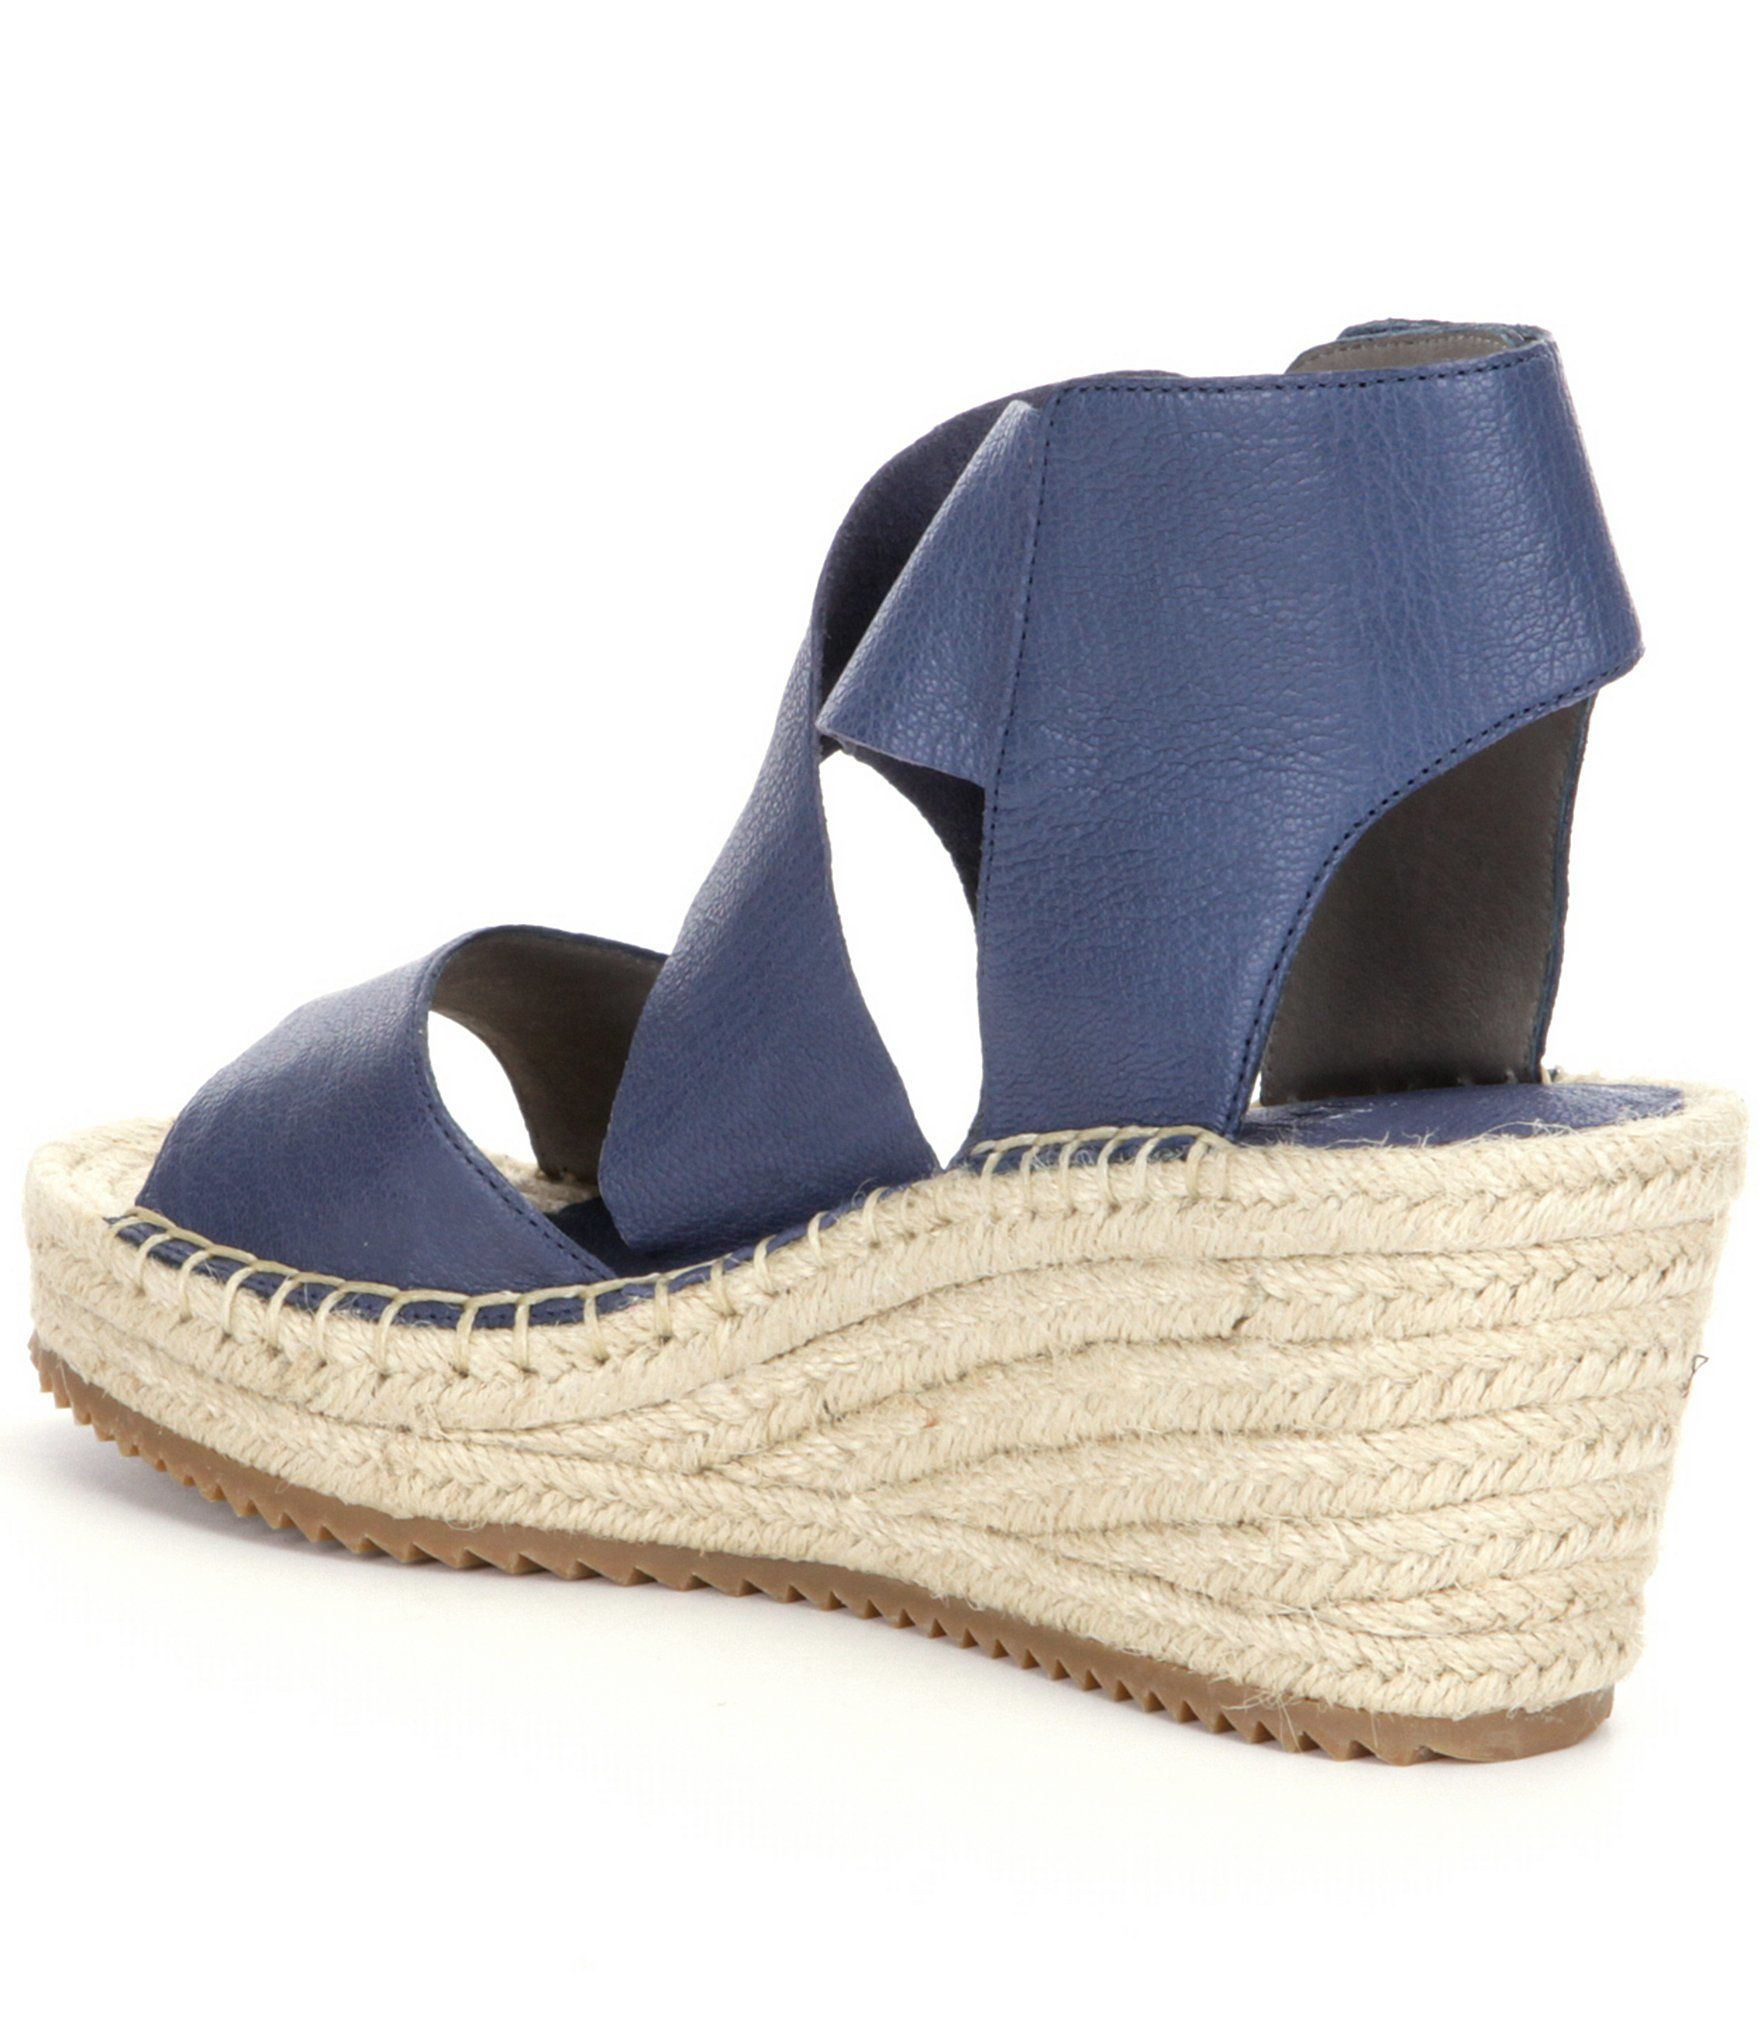 Eileen Fisher Leather Willow Espadrilles in Blue Lyst